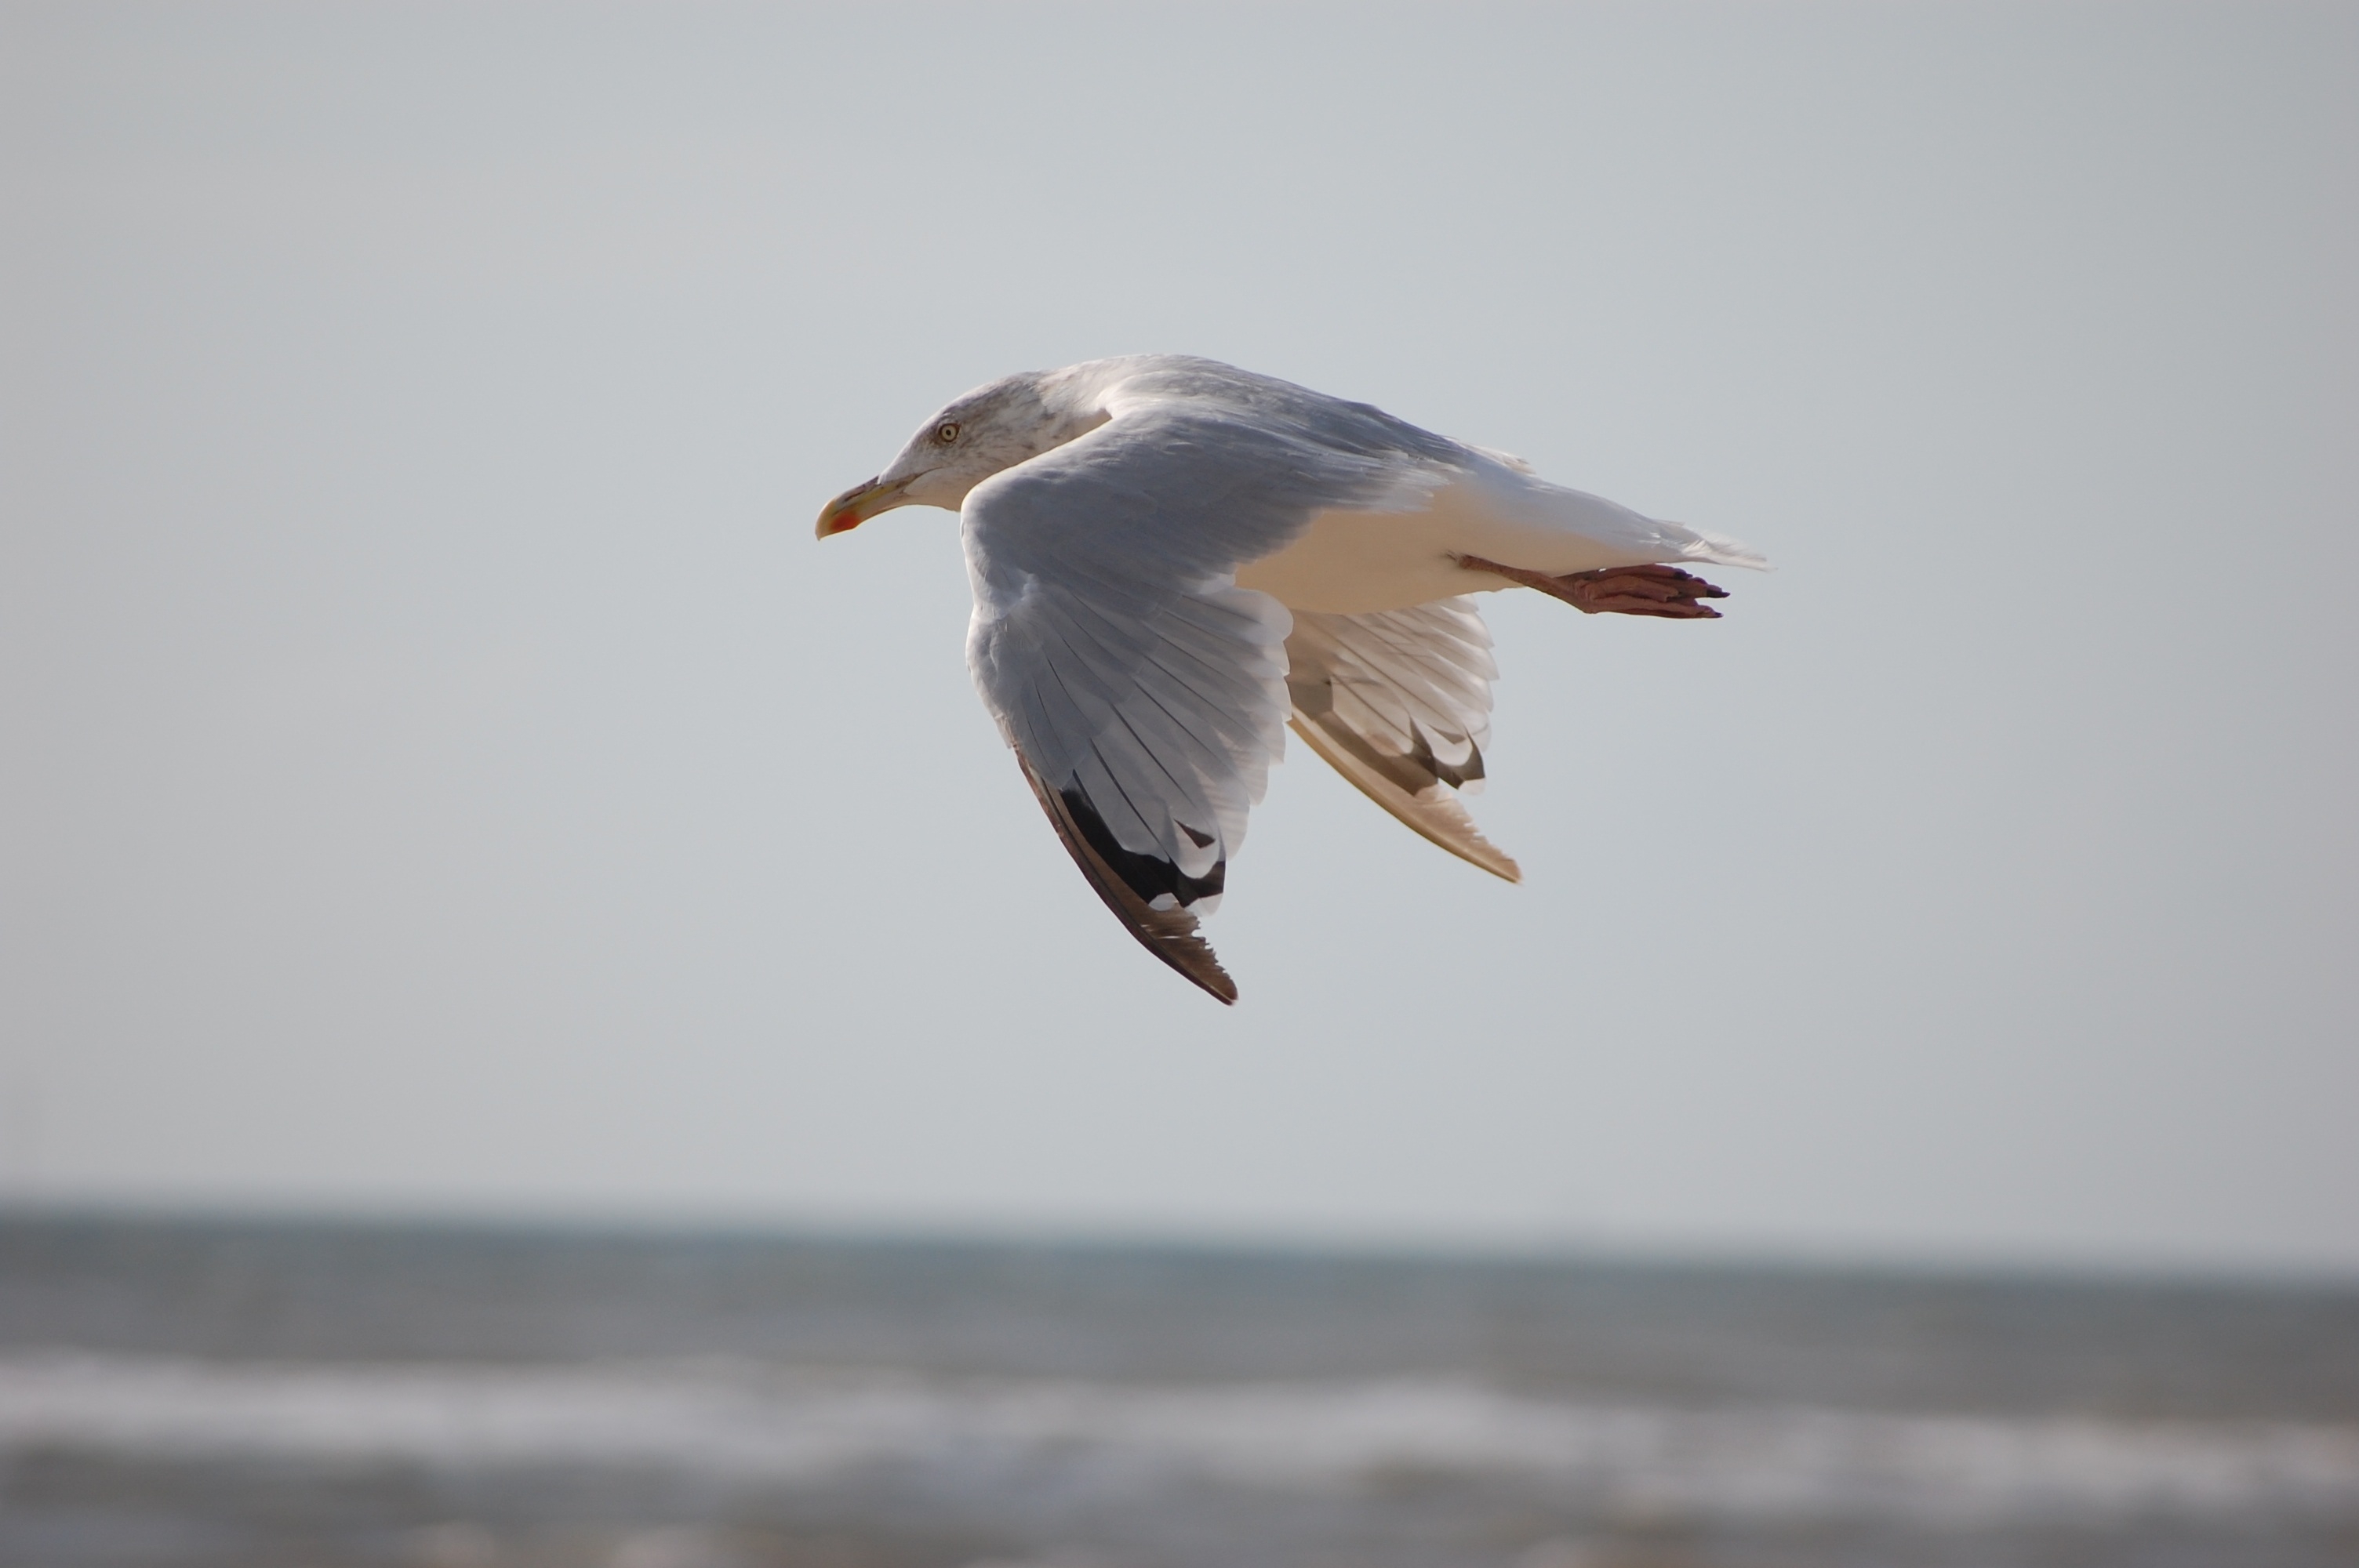 A seagull clenches its wings for comfortable flight against the wind